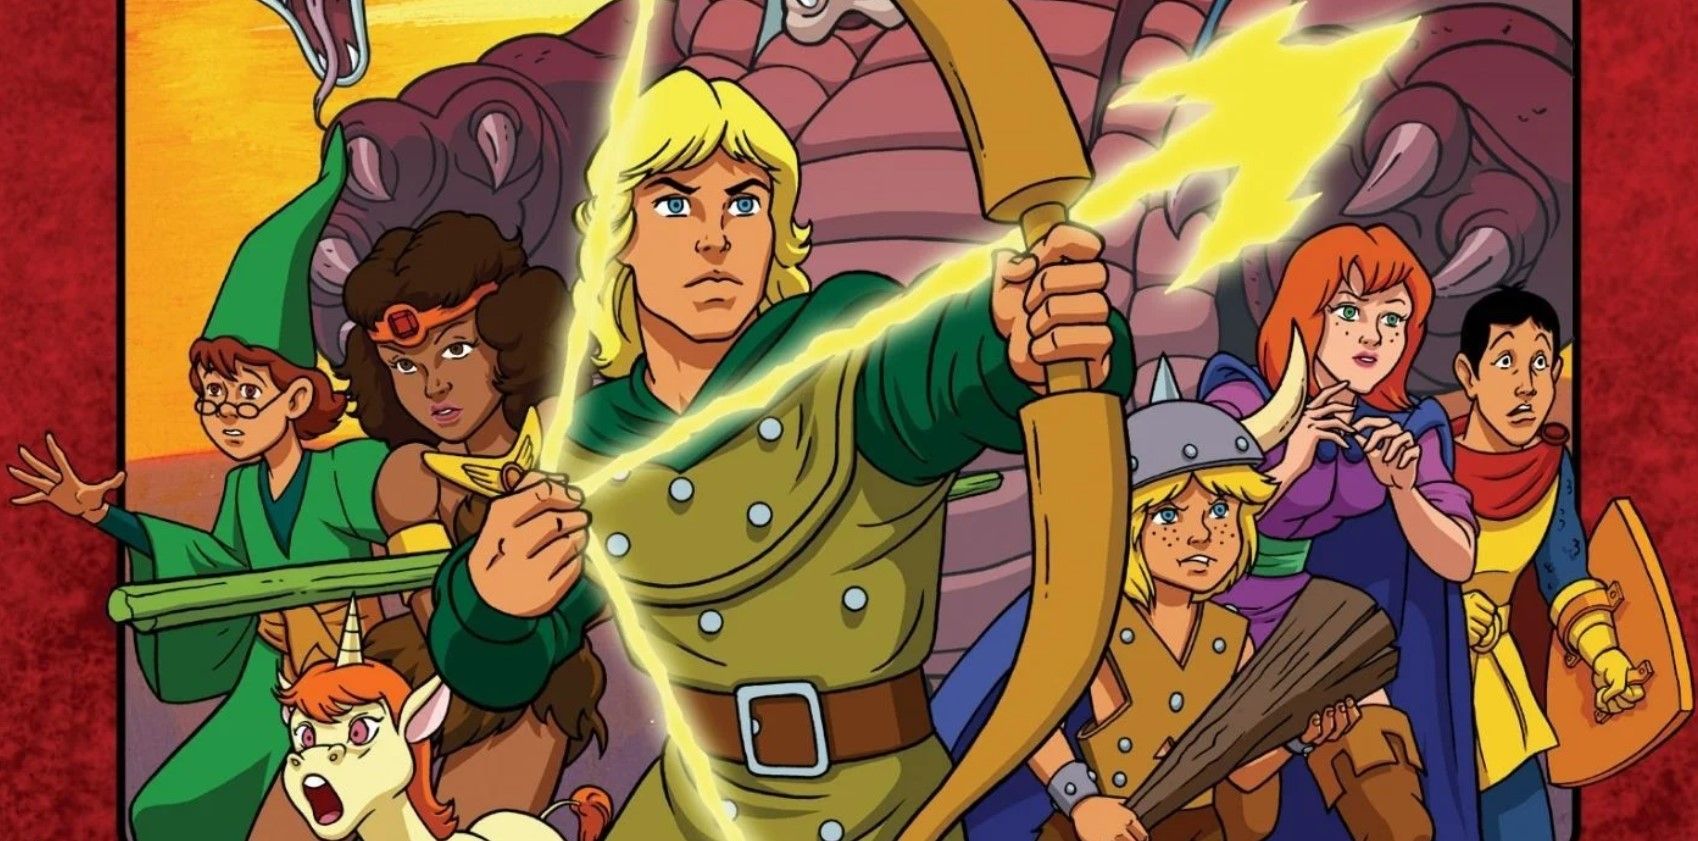 Dungeons Dragons Cartoon Porn - Dungeons and Dragons reboot movie gets official title